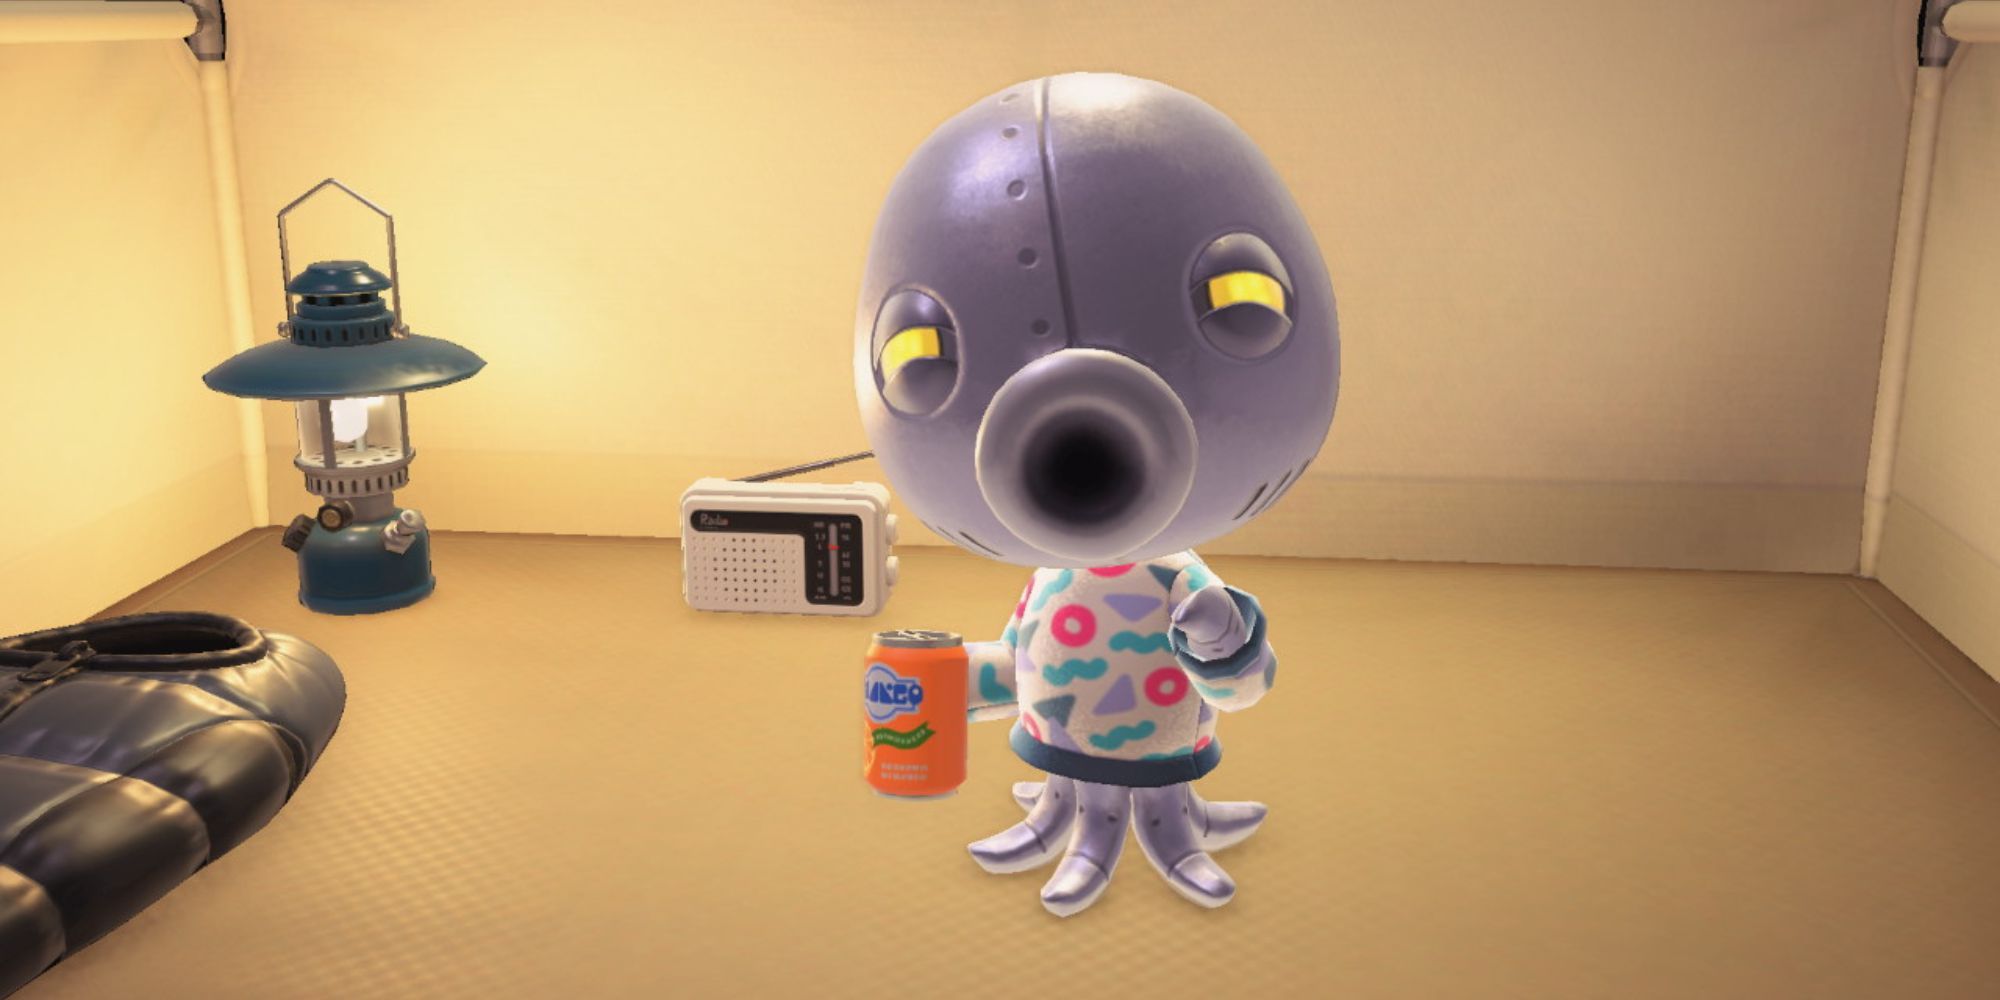 Cephalobot holds a soda can while standing in his tent